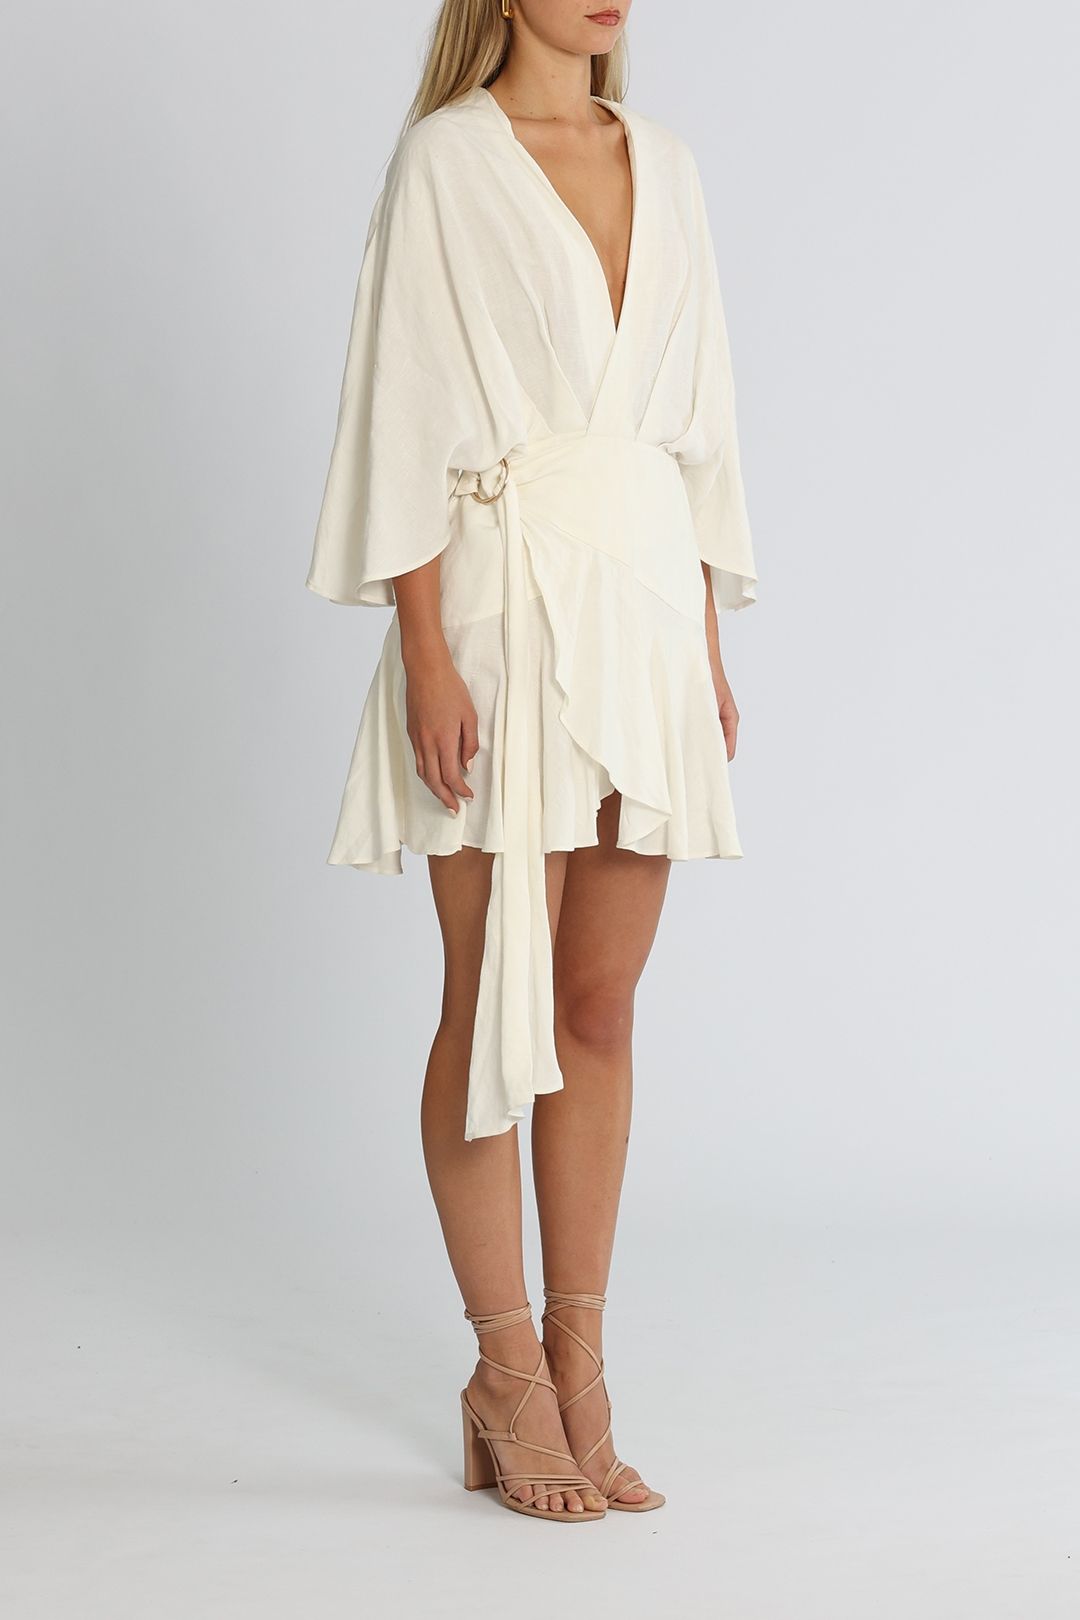 Significant Other Olivia Dress Ivory Mini